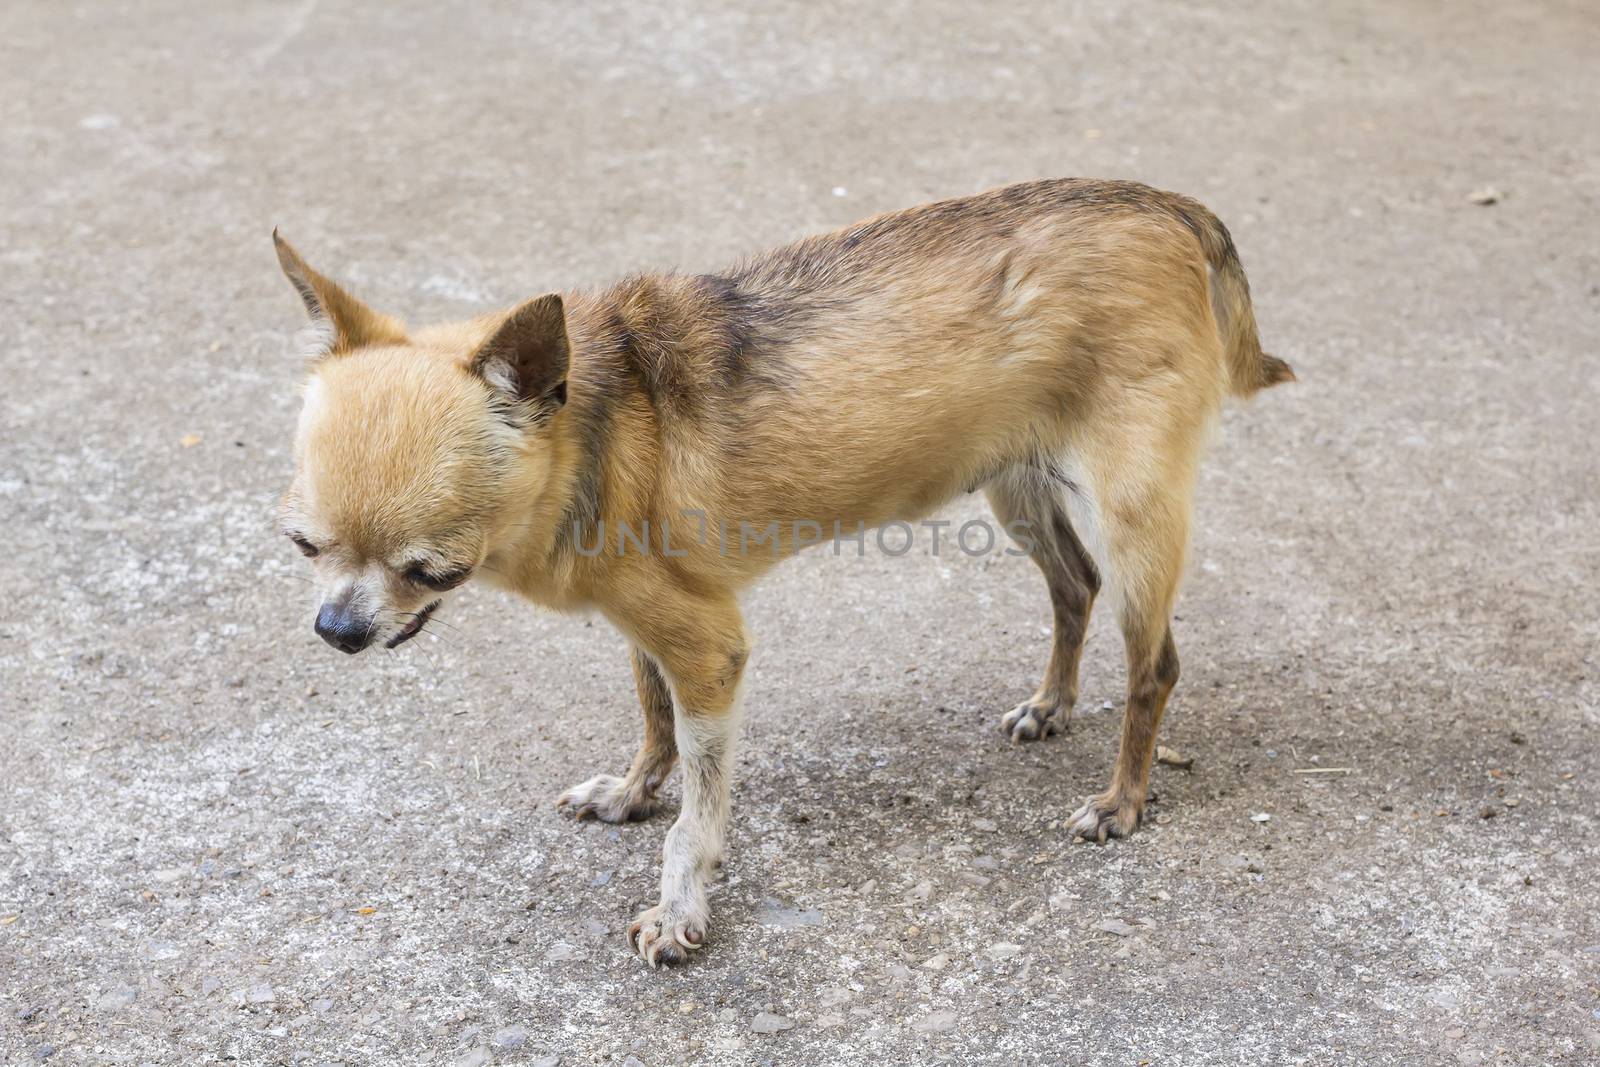 Short haired chihuahua dog standing